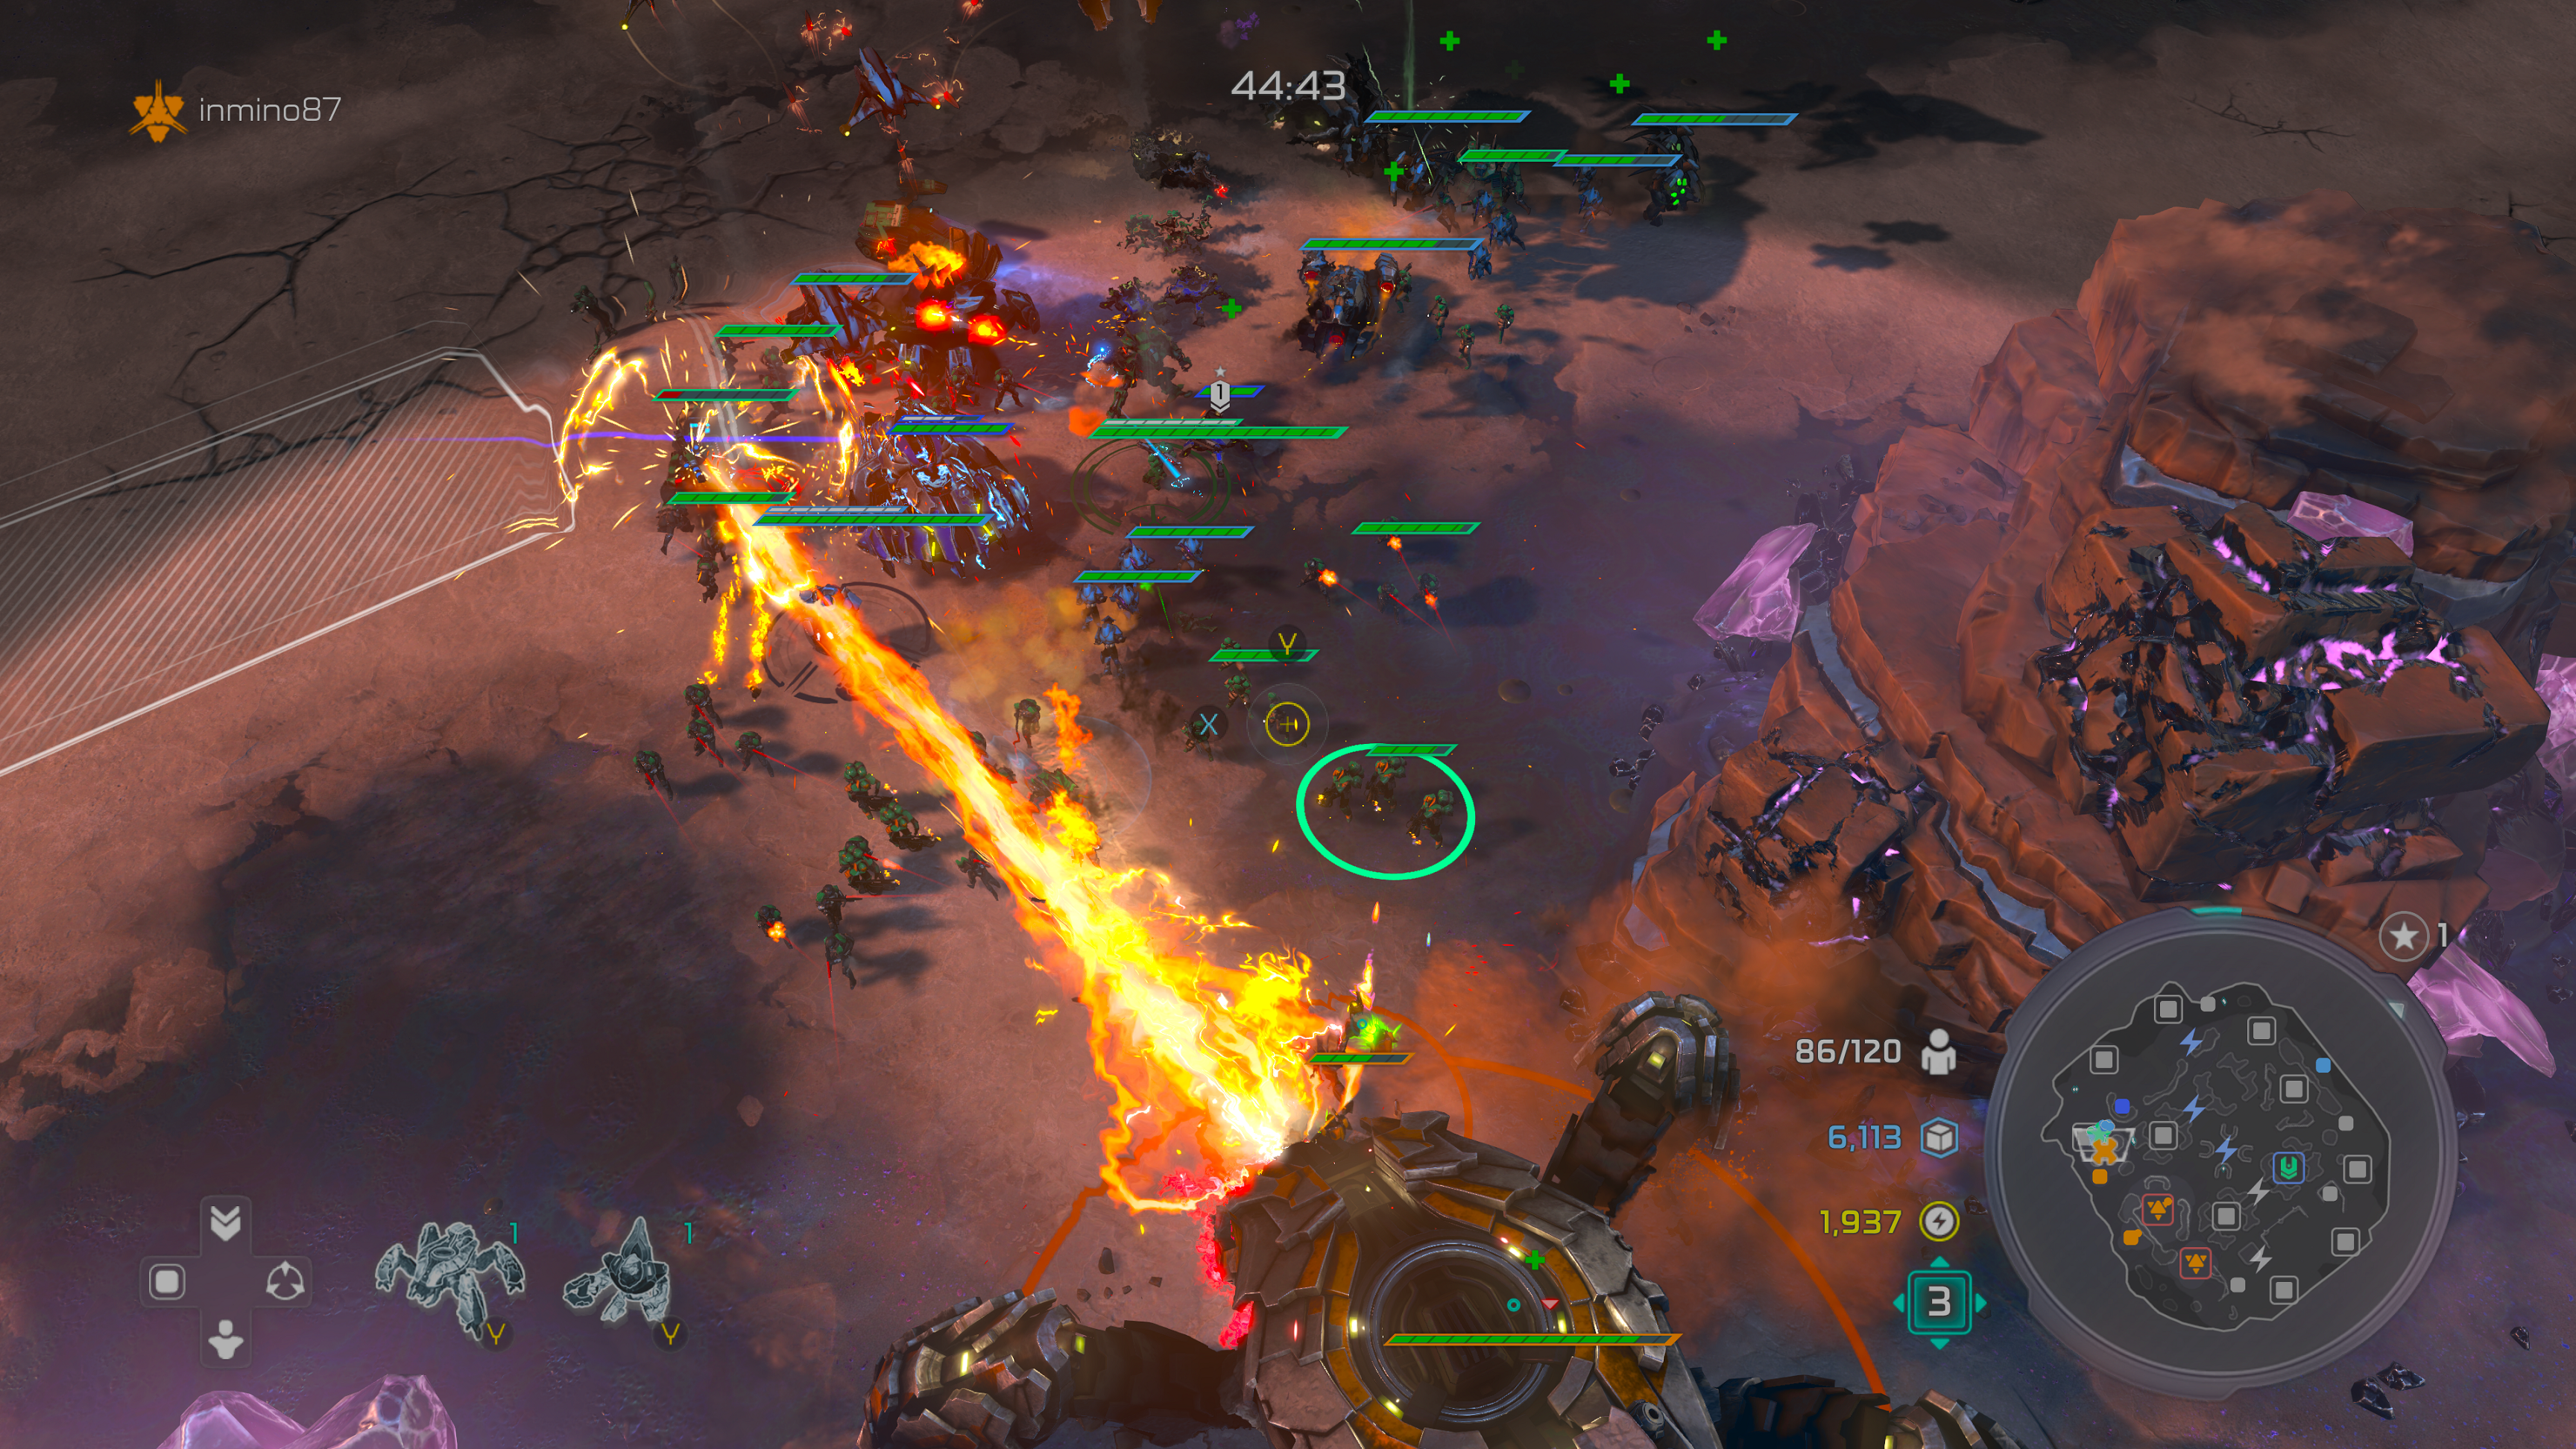 Halo Wars 2 2020-07-25 22-16-41.png